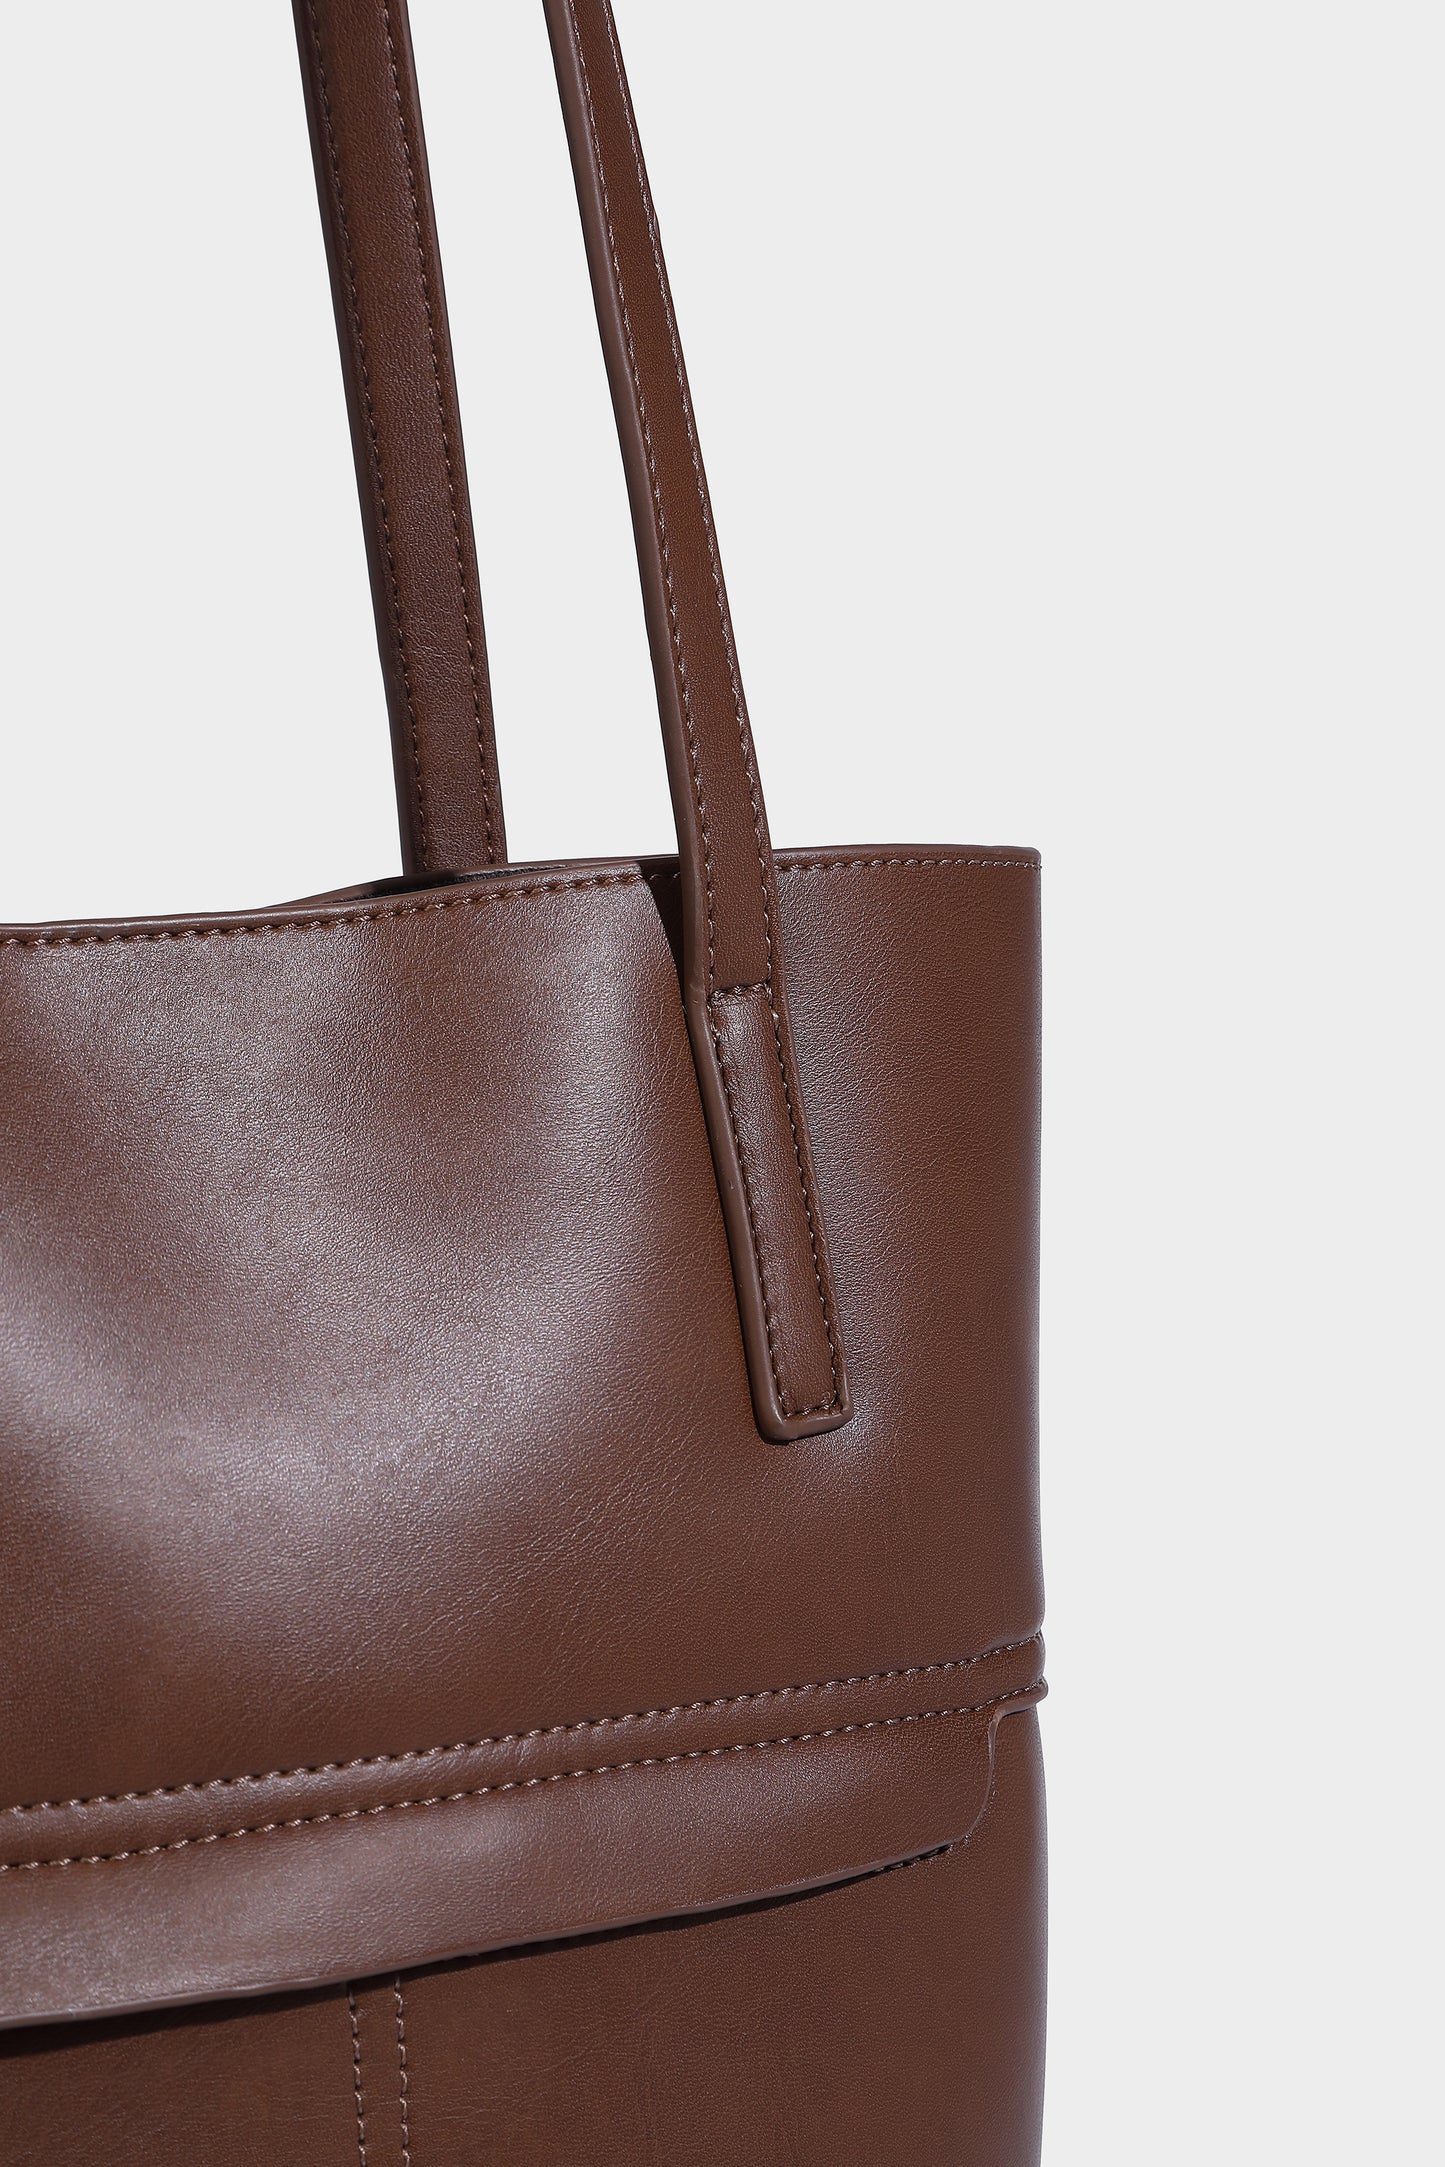 Made of vegetable tanned leather, this bucket bag is environmentally friendly and of high quality